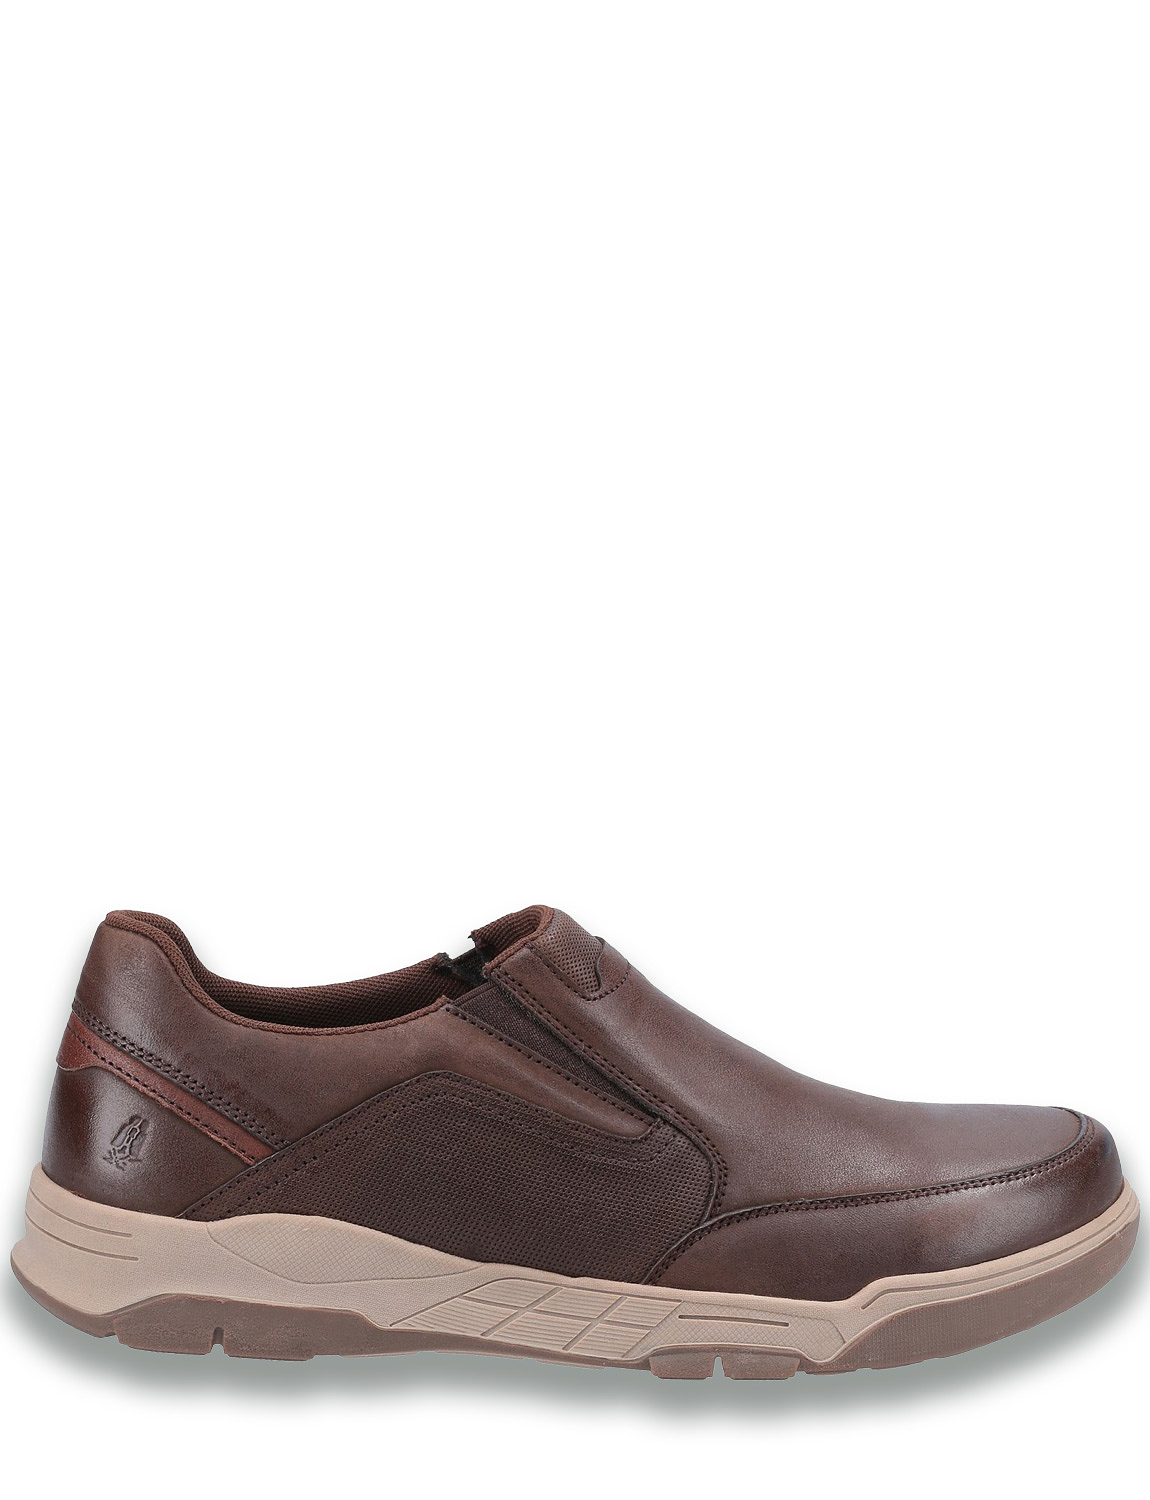 Mens Hush Puppies Wide Fit Leather Slip On Shoe Fletcher | Chums